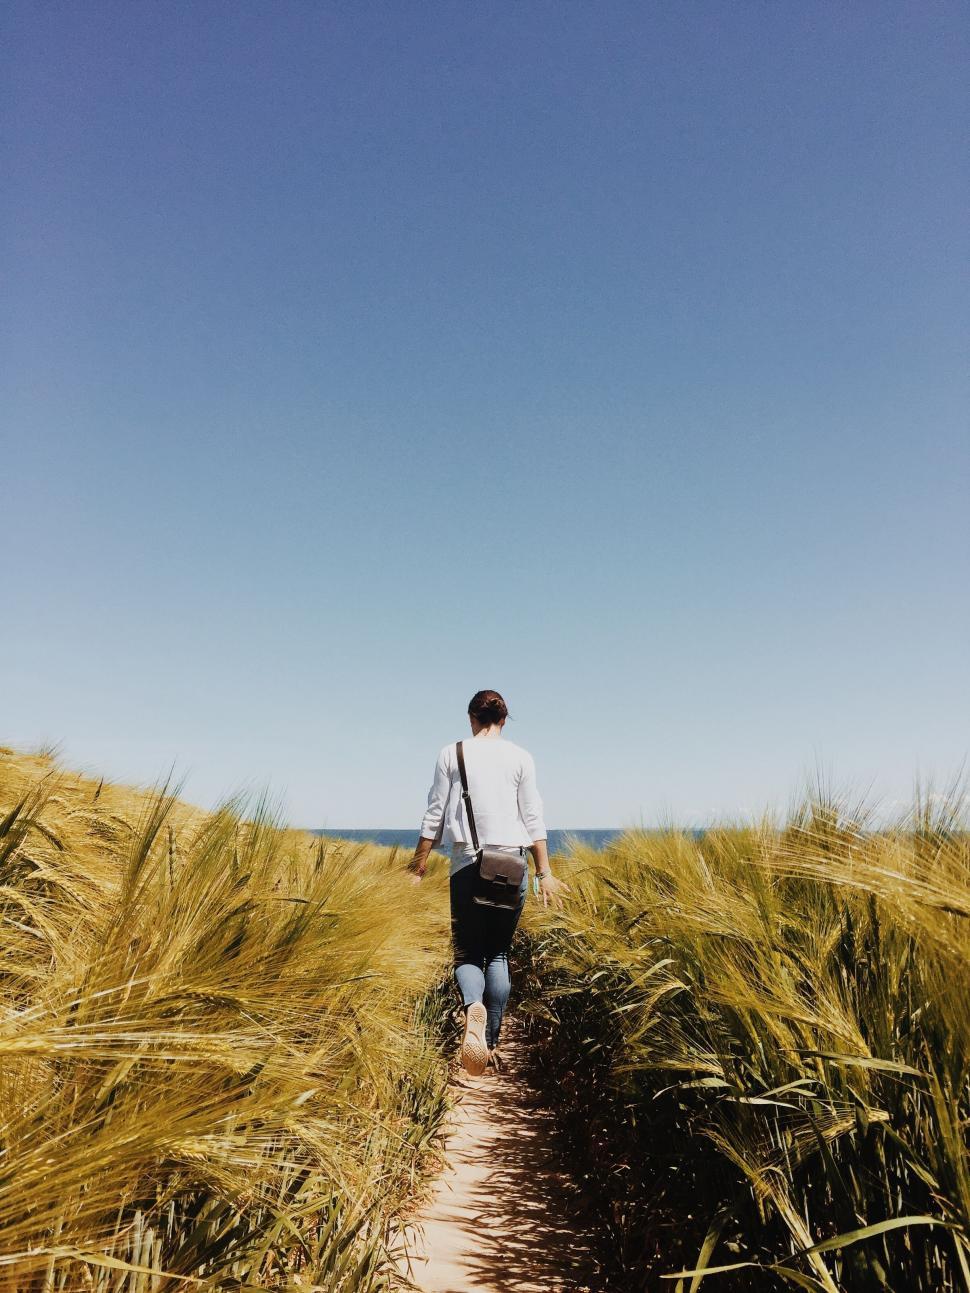 Free Image of Man Walking Through a Field of Tall Grass 